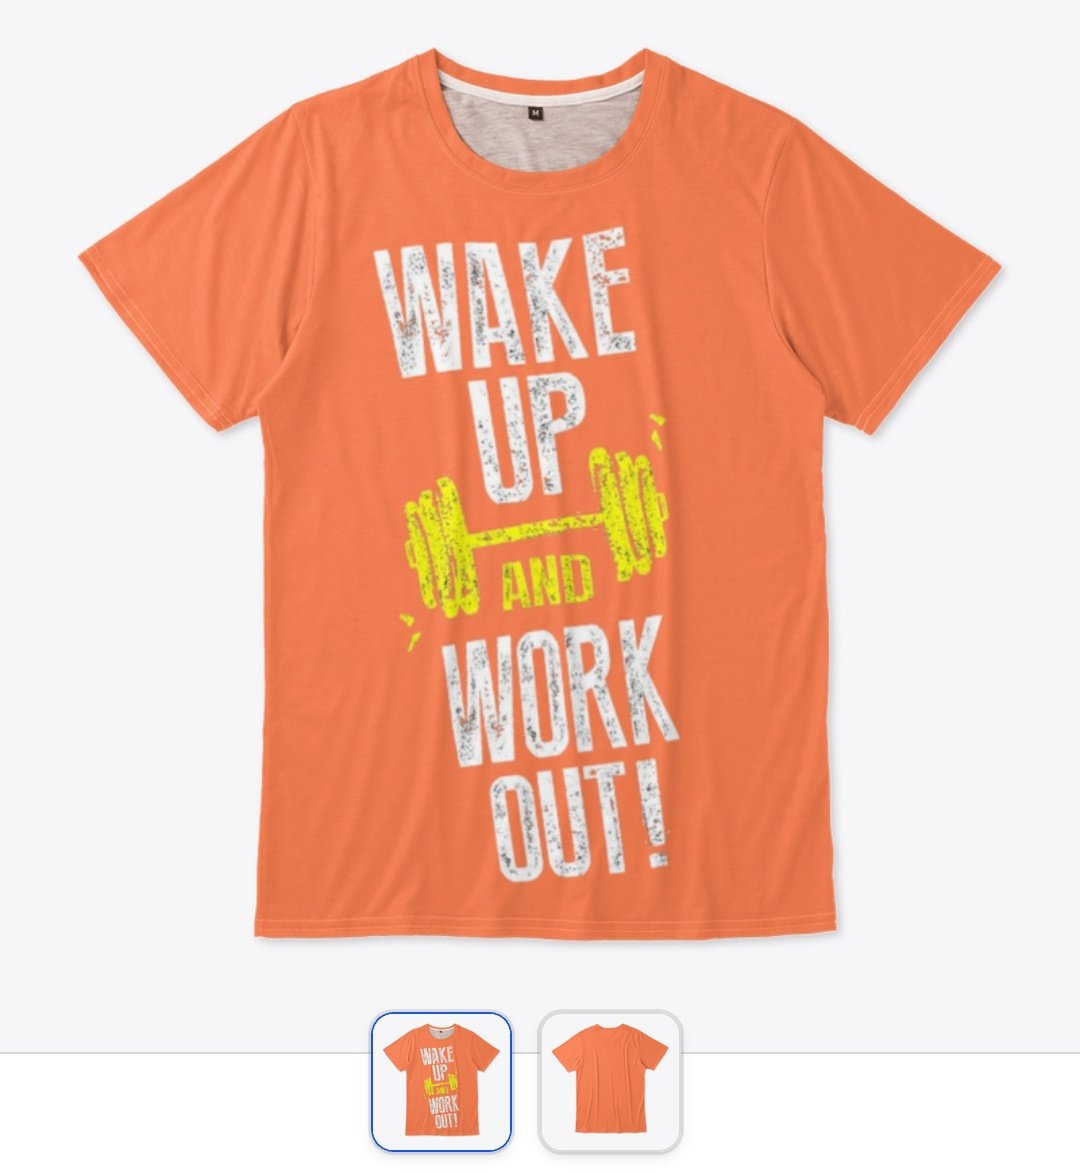 'Gear up and conquer your fitness goals in style with our premium workout t-shirts & hoodies! Embrace comfort, unleash your potential, and make a statement with DailyNeed.
 
Shop now at dailyneed.creator-spring.com/listing/work-o…

#FitnessFashion #DailyNeed #WorkoutGoals #tshirt #hoodies #Outfits